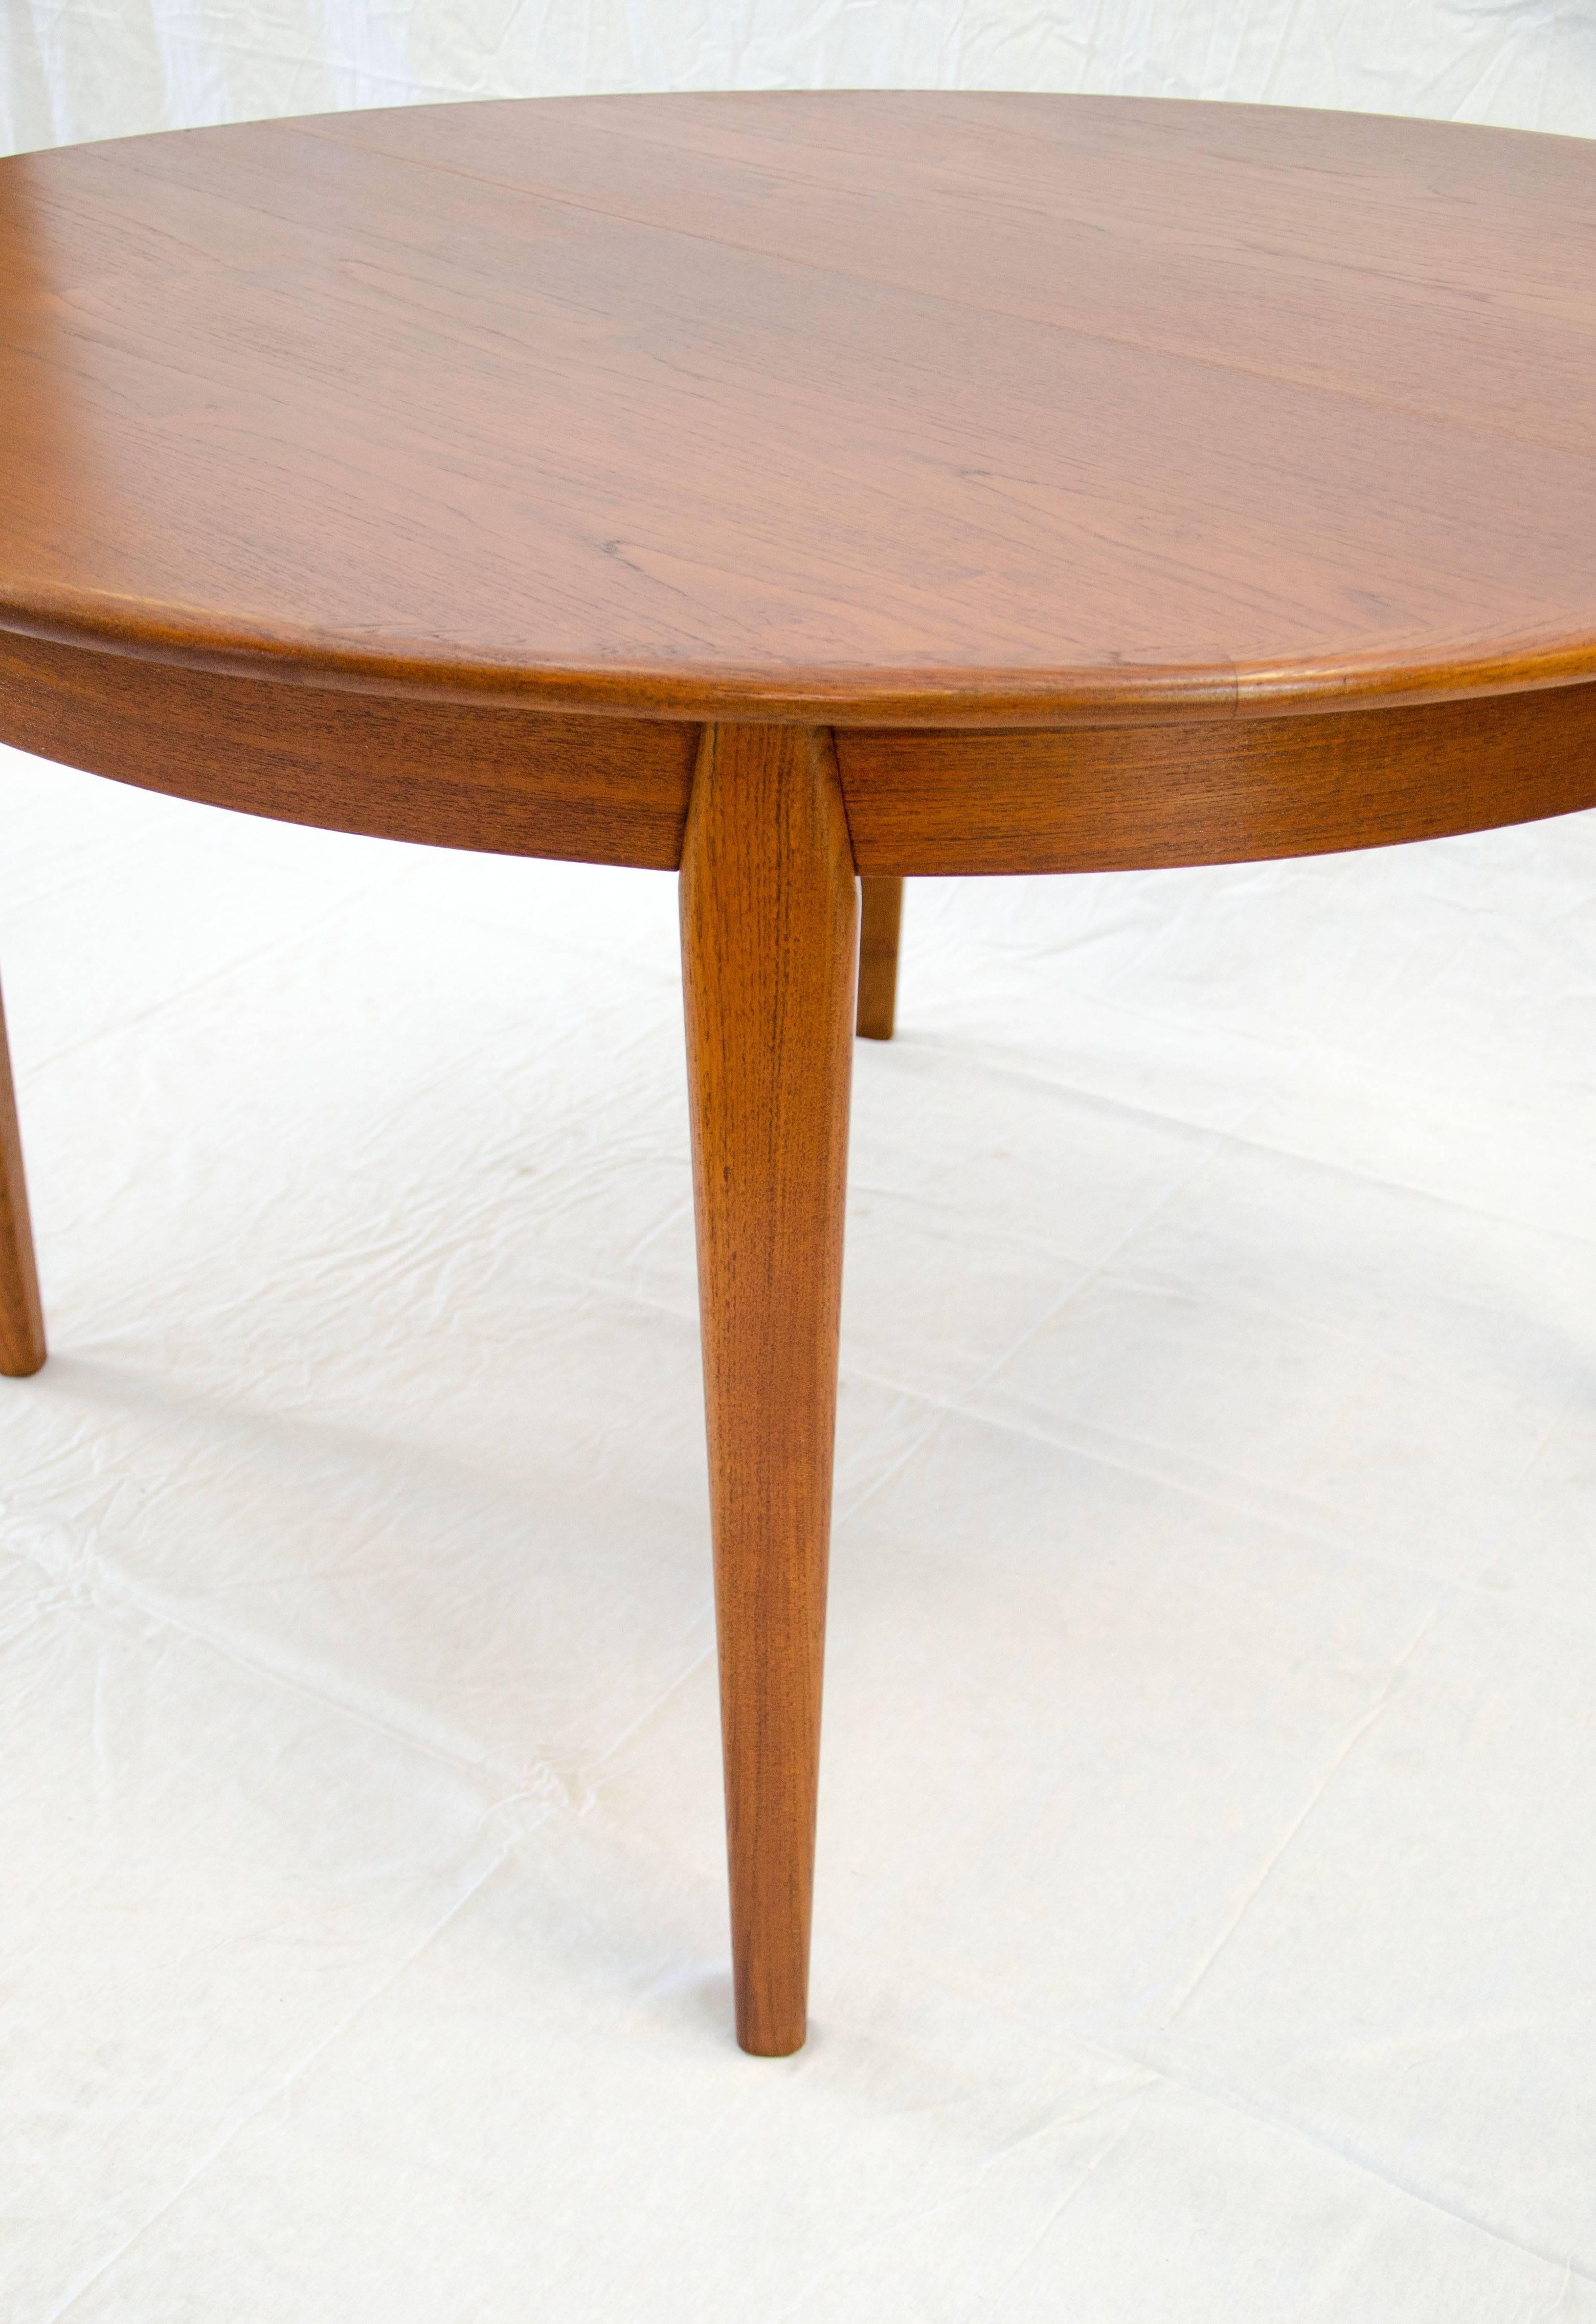 20th Century Danish Teak Round Dining Table, Three Leaves with Aprons by H. Sigh & Sons